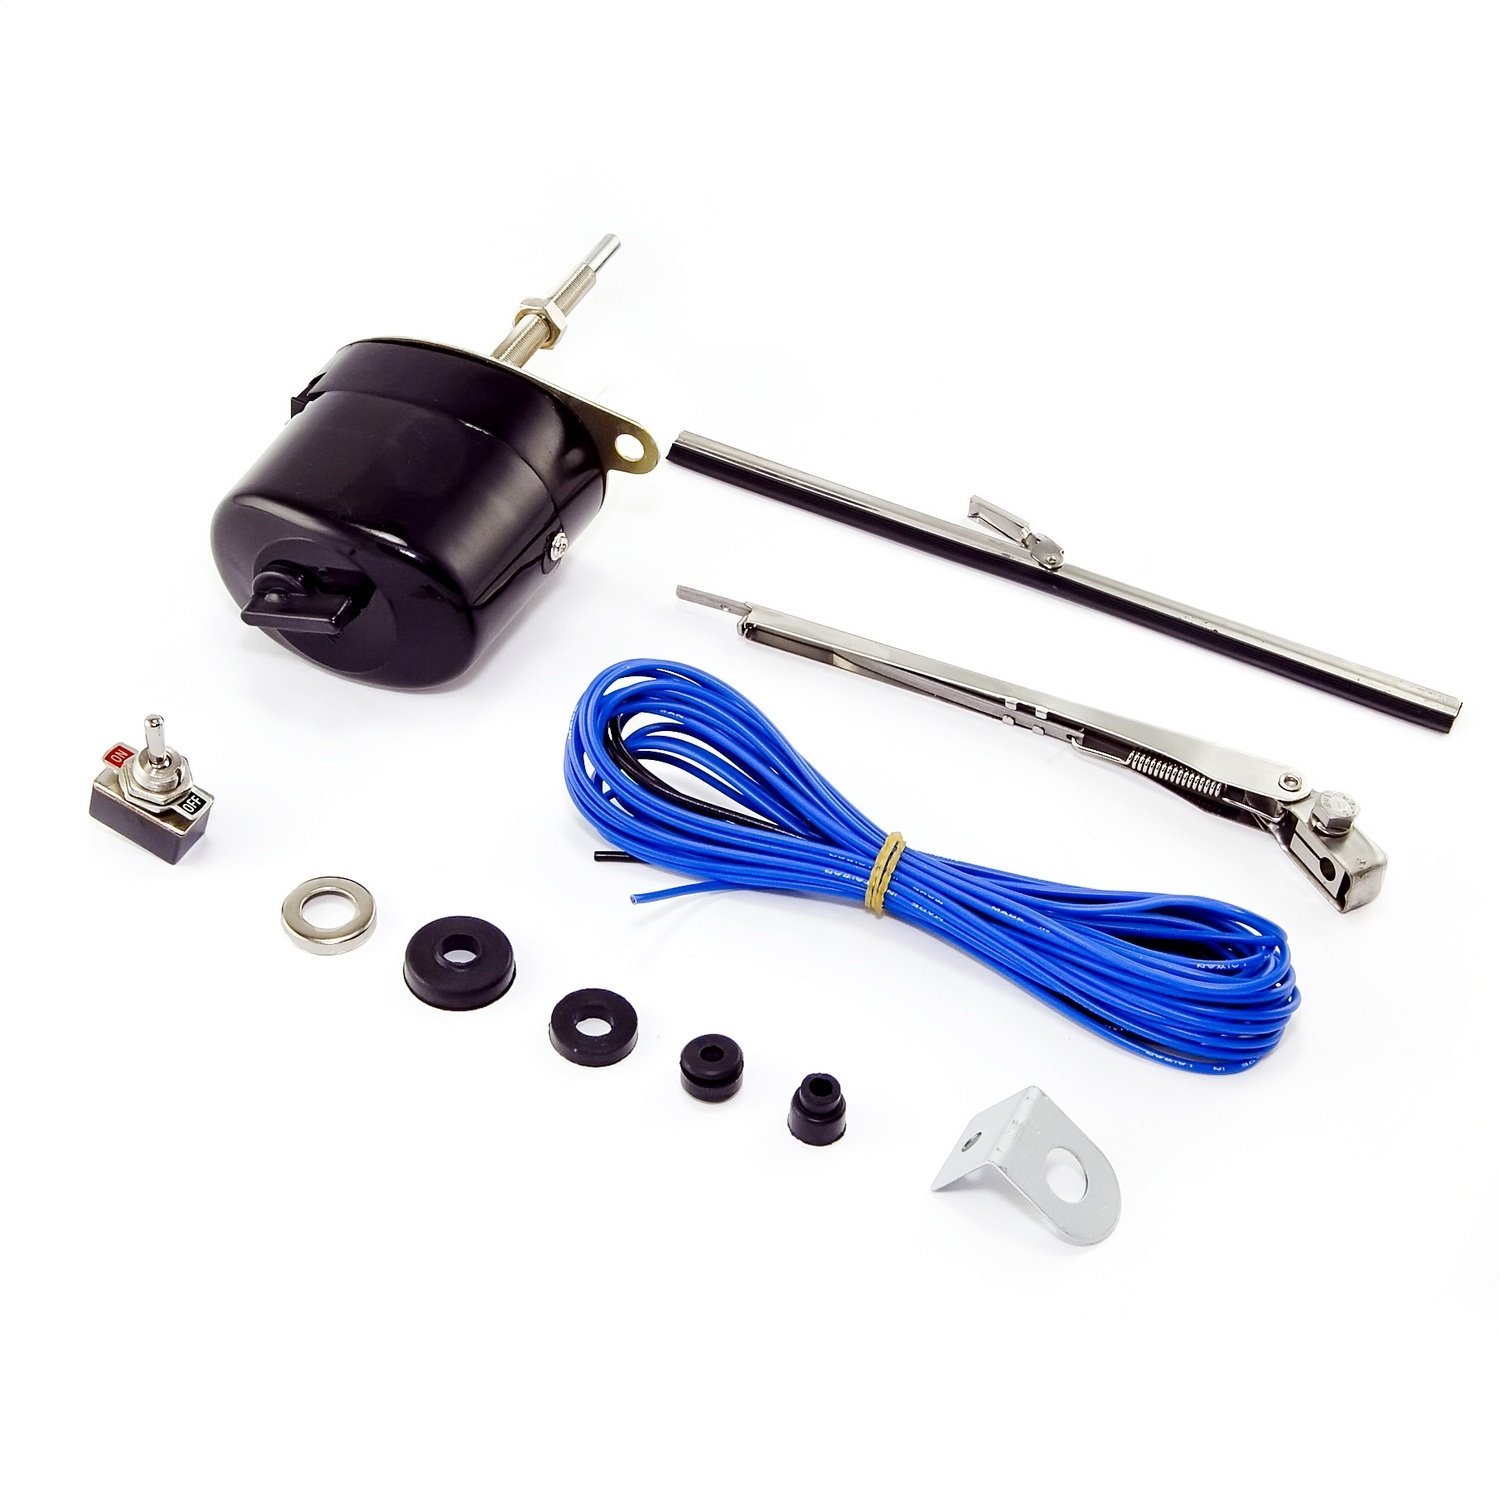 This 24-volt windshield wiper motor kit from Omix-ADA fits 50-52 Willys M38s and 52-57 M38-A1s.